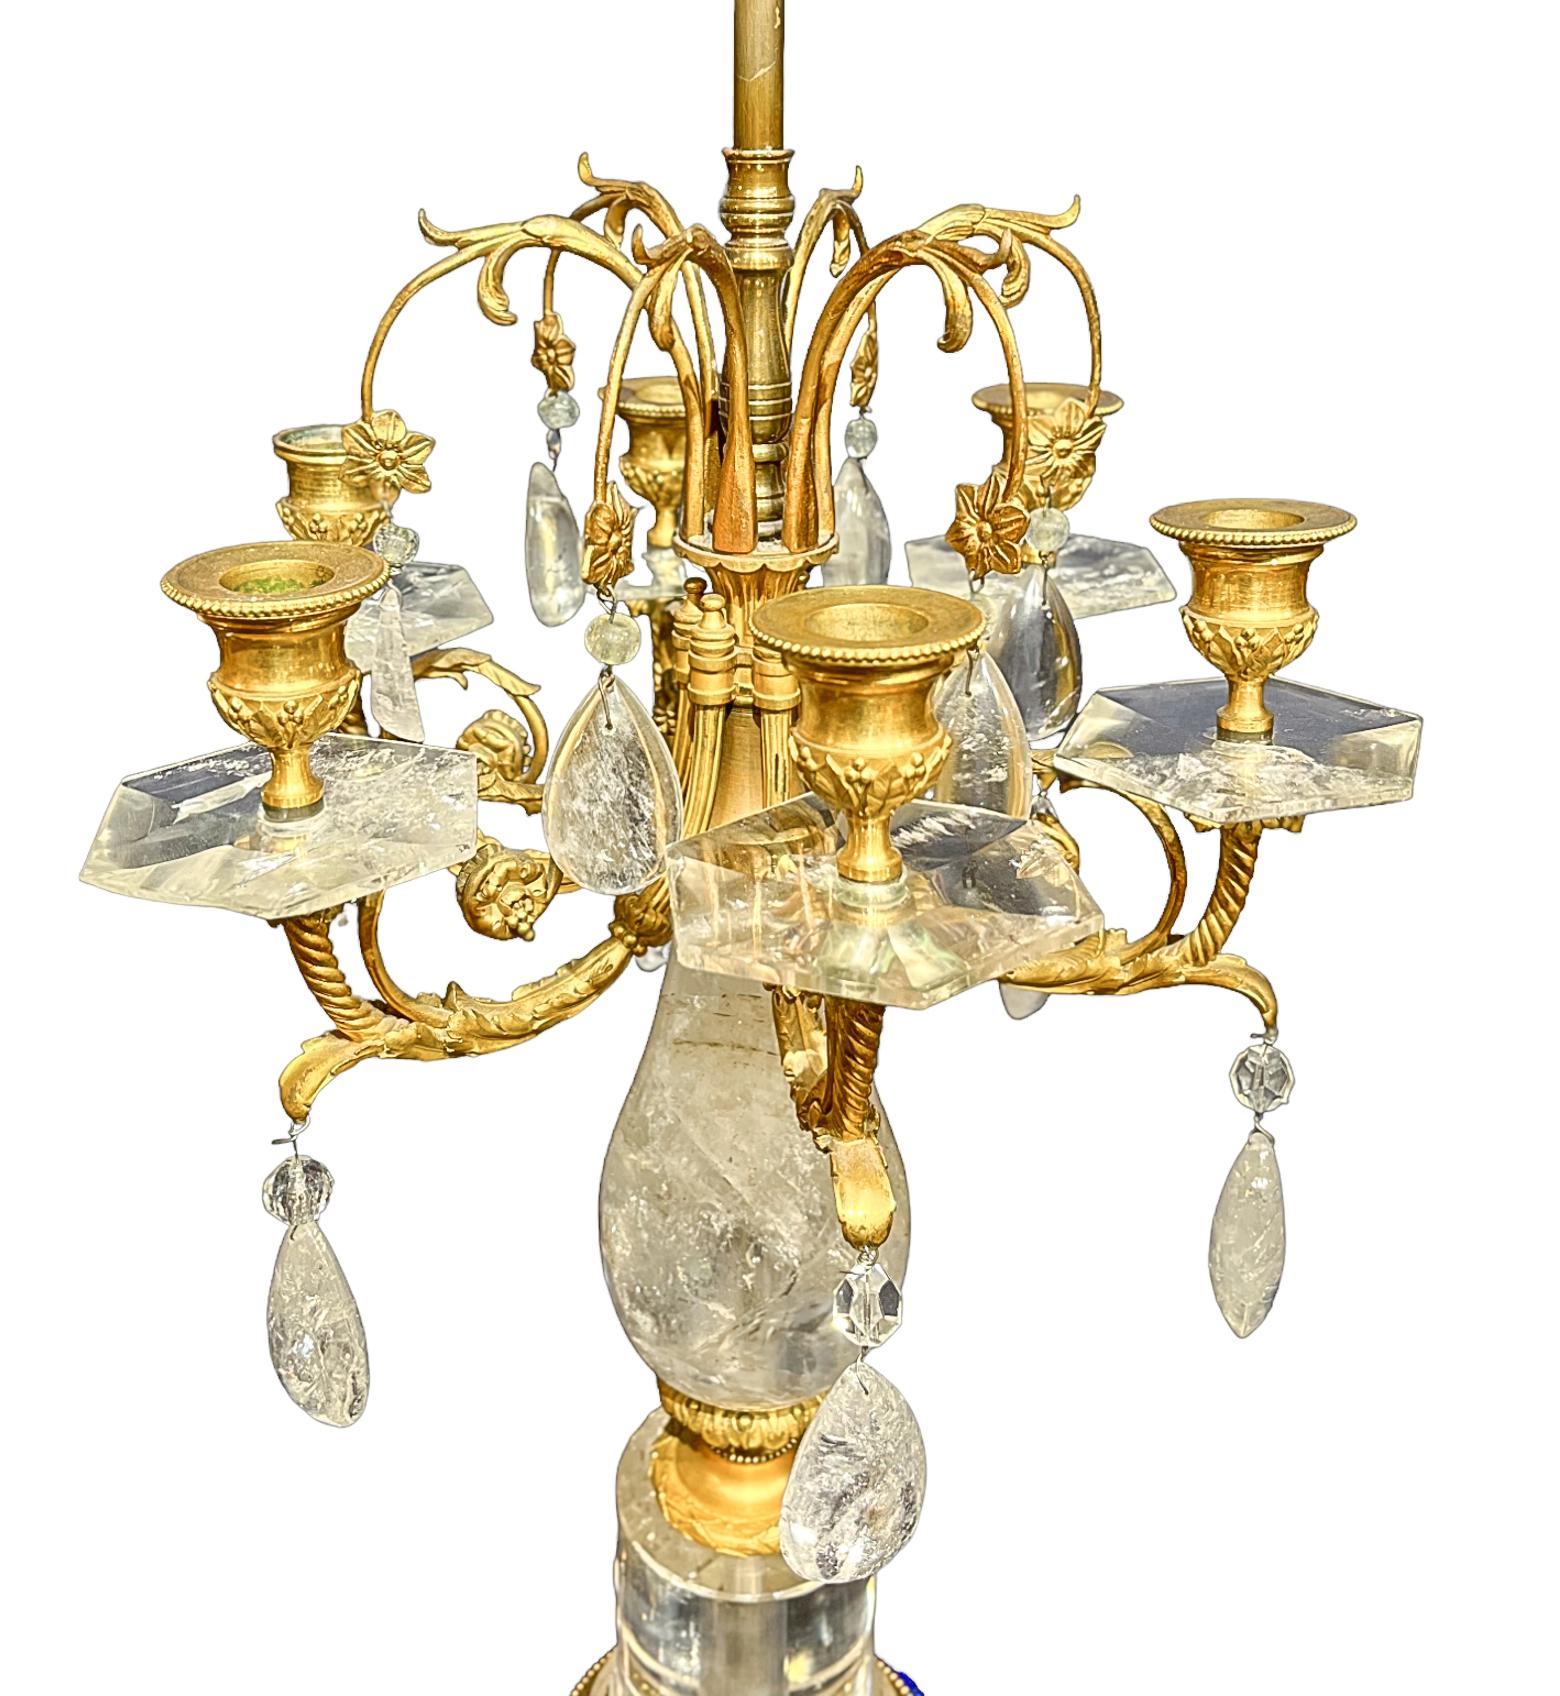 Antique rock crystal clock with gilt bronze branches and ornamentation. Tear drop cut rock crystals hang from the lamp's ornate branches decorated with scrolling and foliage forms. All resting upon a raised lapis base. 

Dimensions: 35 h x 22w In.